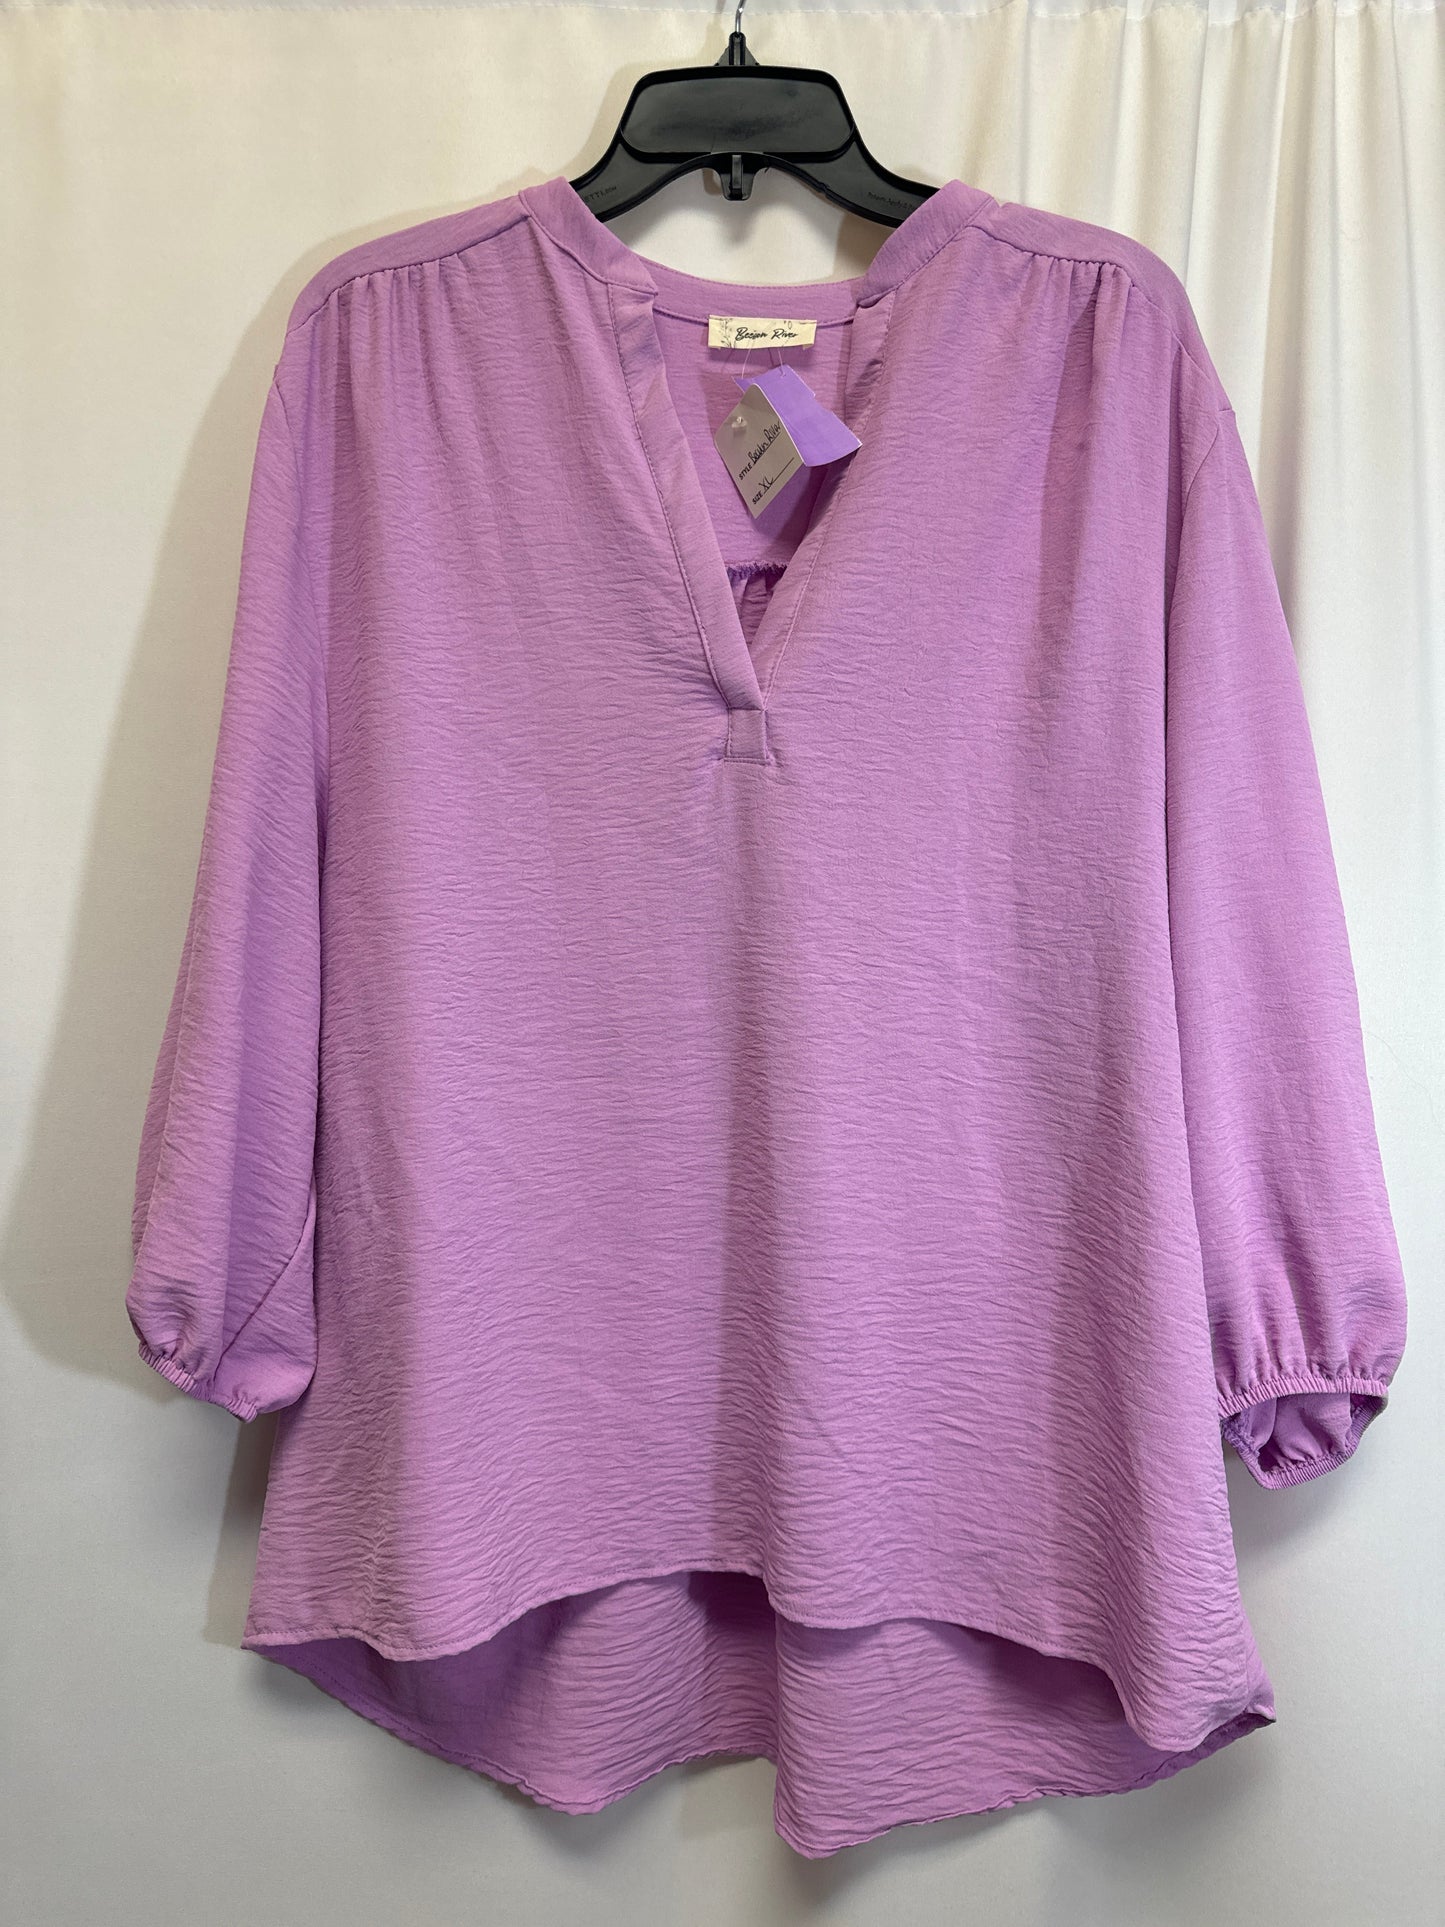 Purple Top 3/4 Sleeve Clothes Mentor, Size Xl